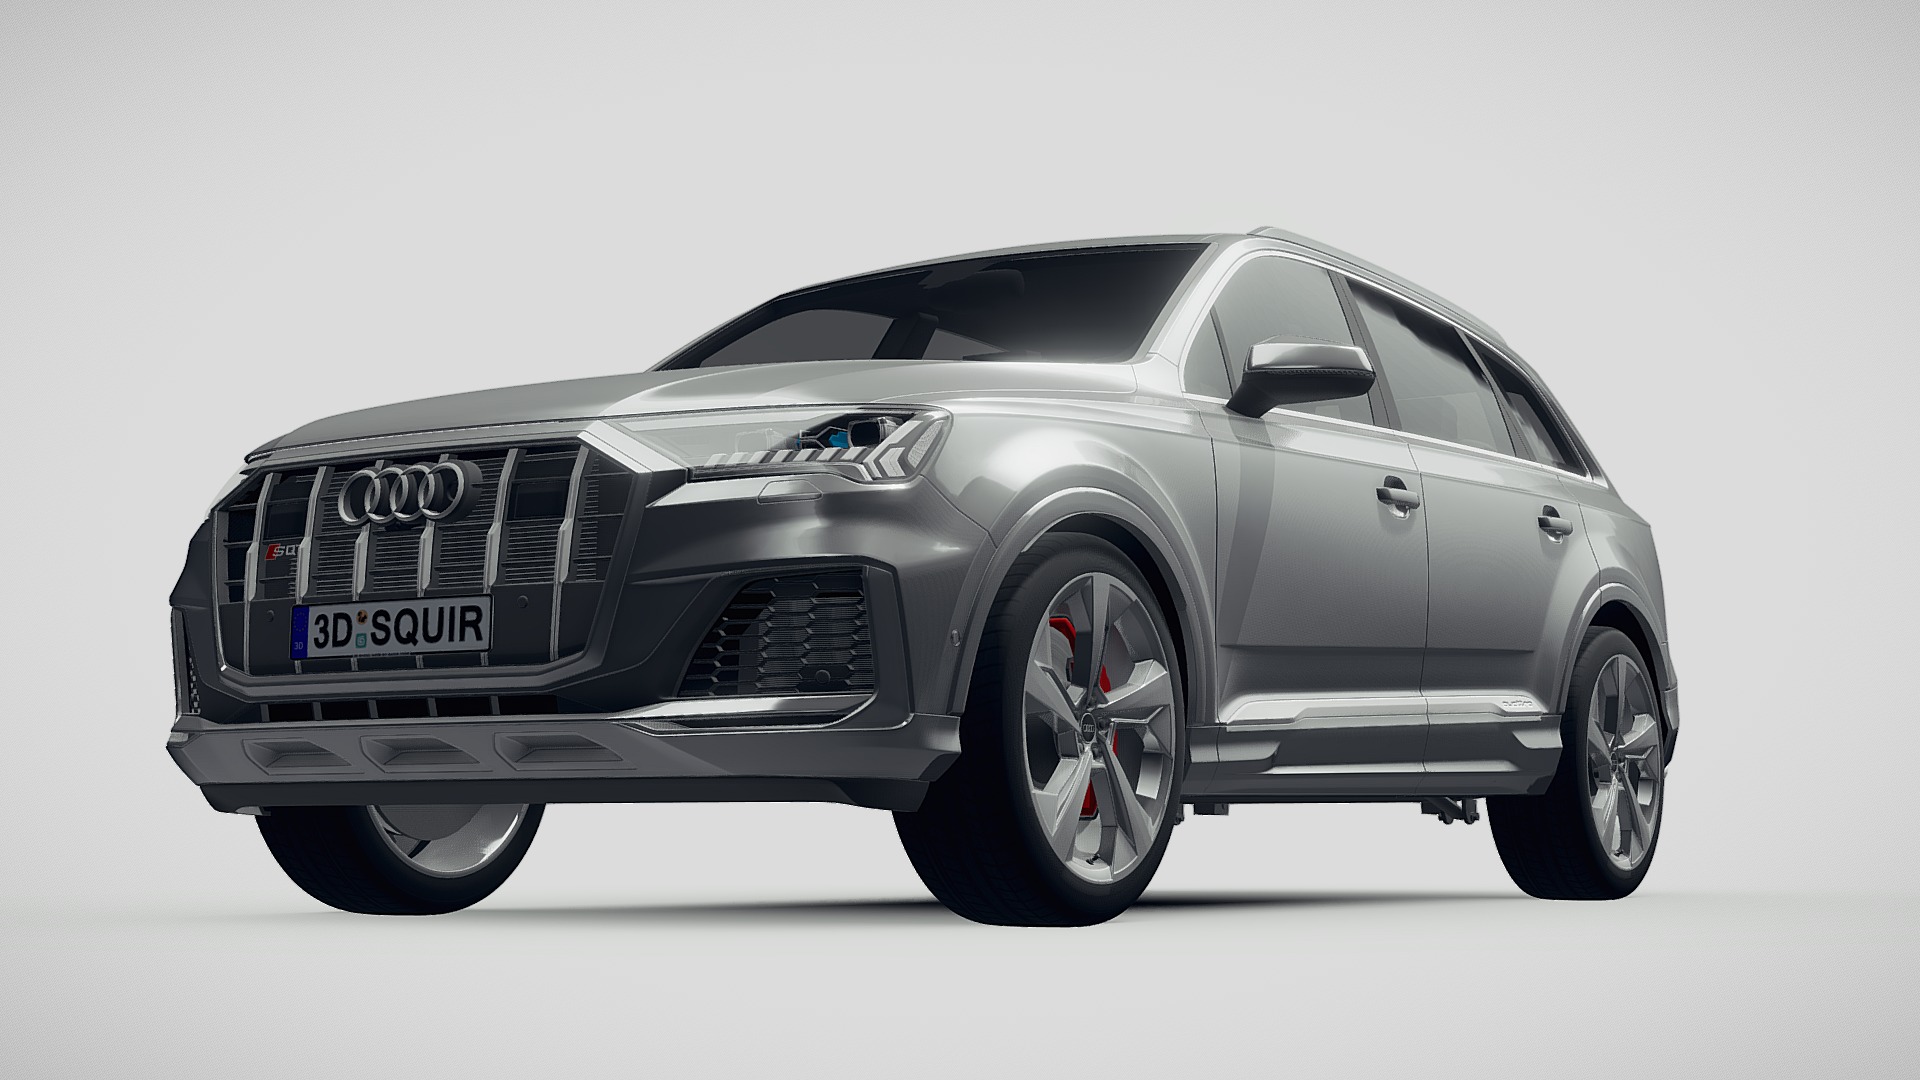 3D model Audi SQ7 2020 - This is a 3D model of the Audi SQ7 2020. The 3D model is about a silver car with a black background.